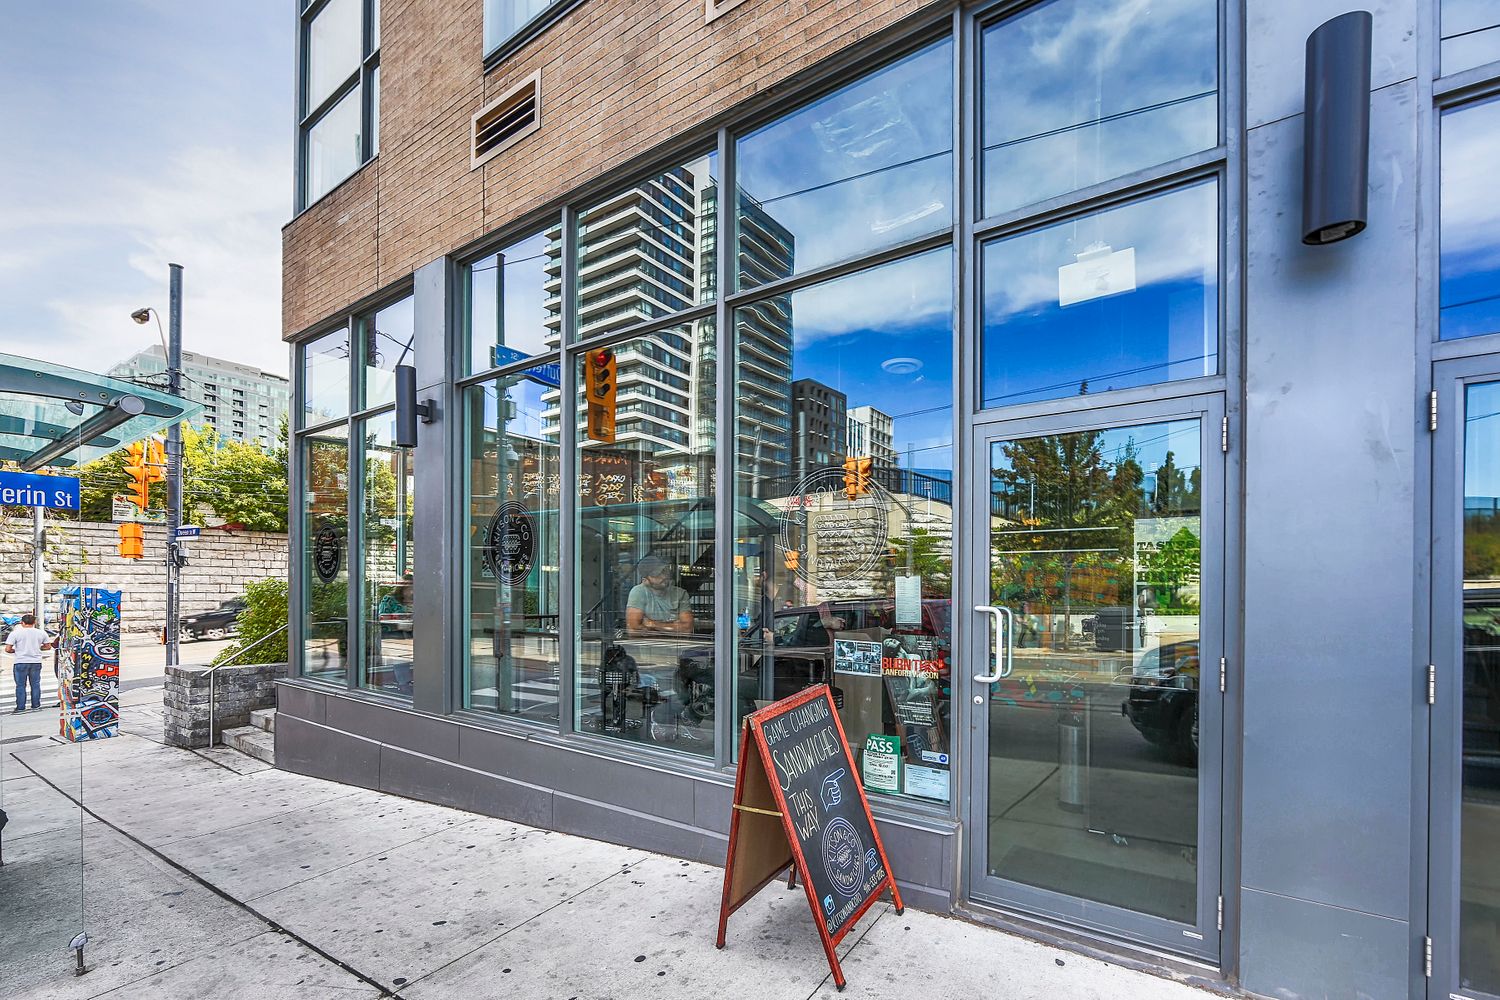 1205 Queen Street W. Q Loft is located in  West End, Toronto - image #5 of 5